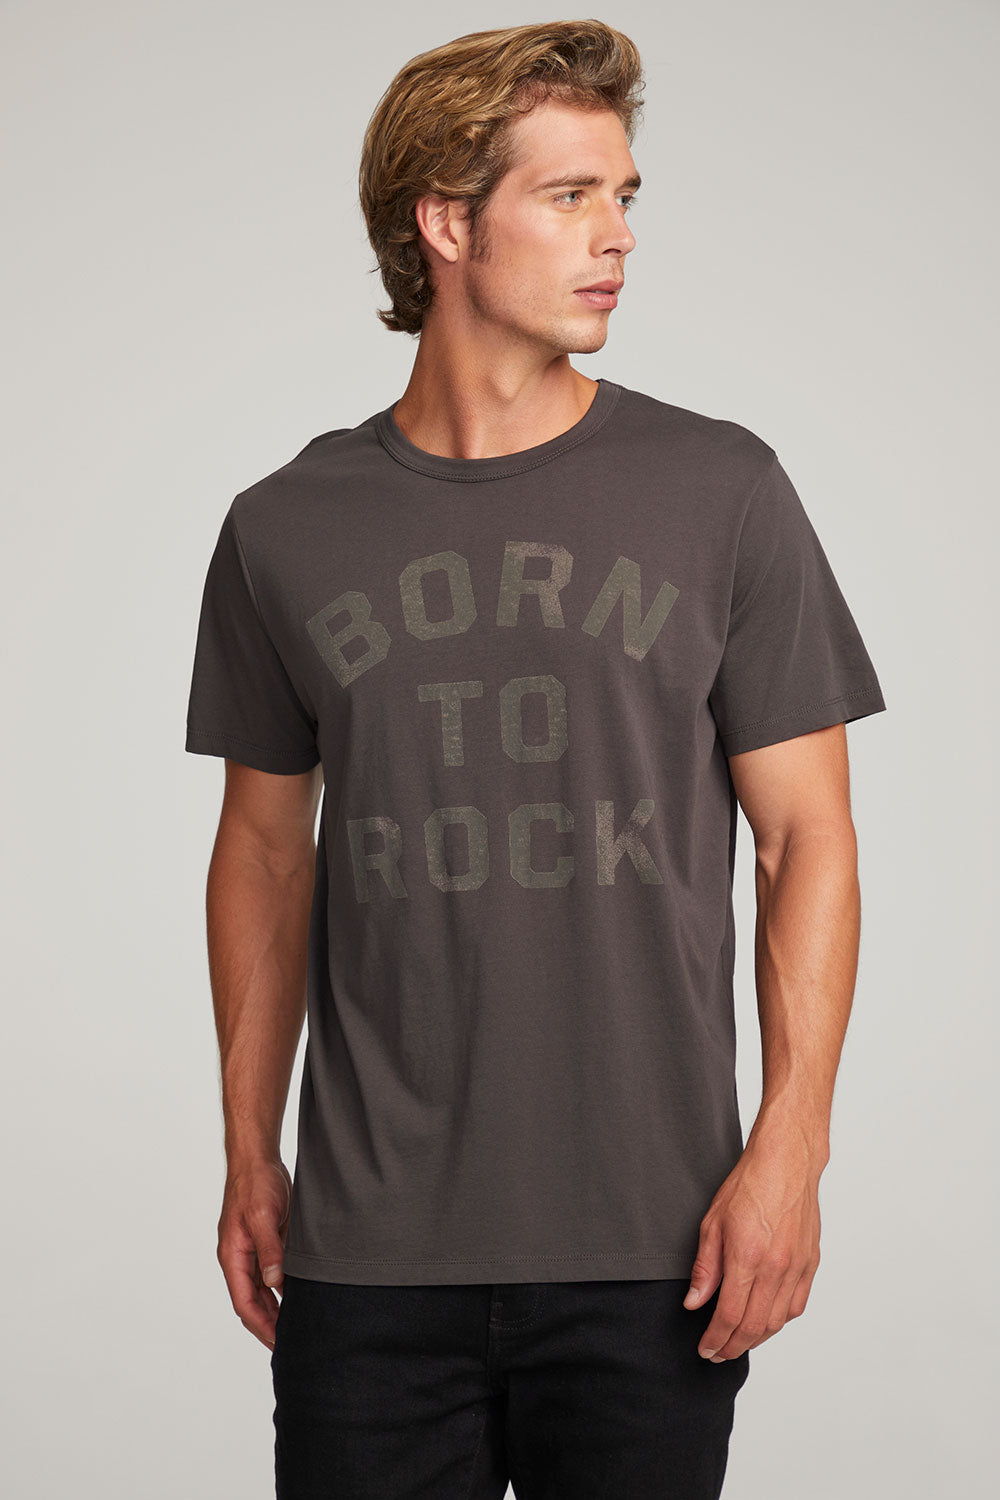 Born To Rock Mens Tee MENS chaserbrand